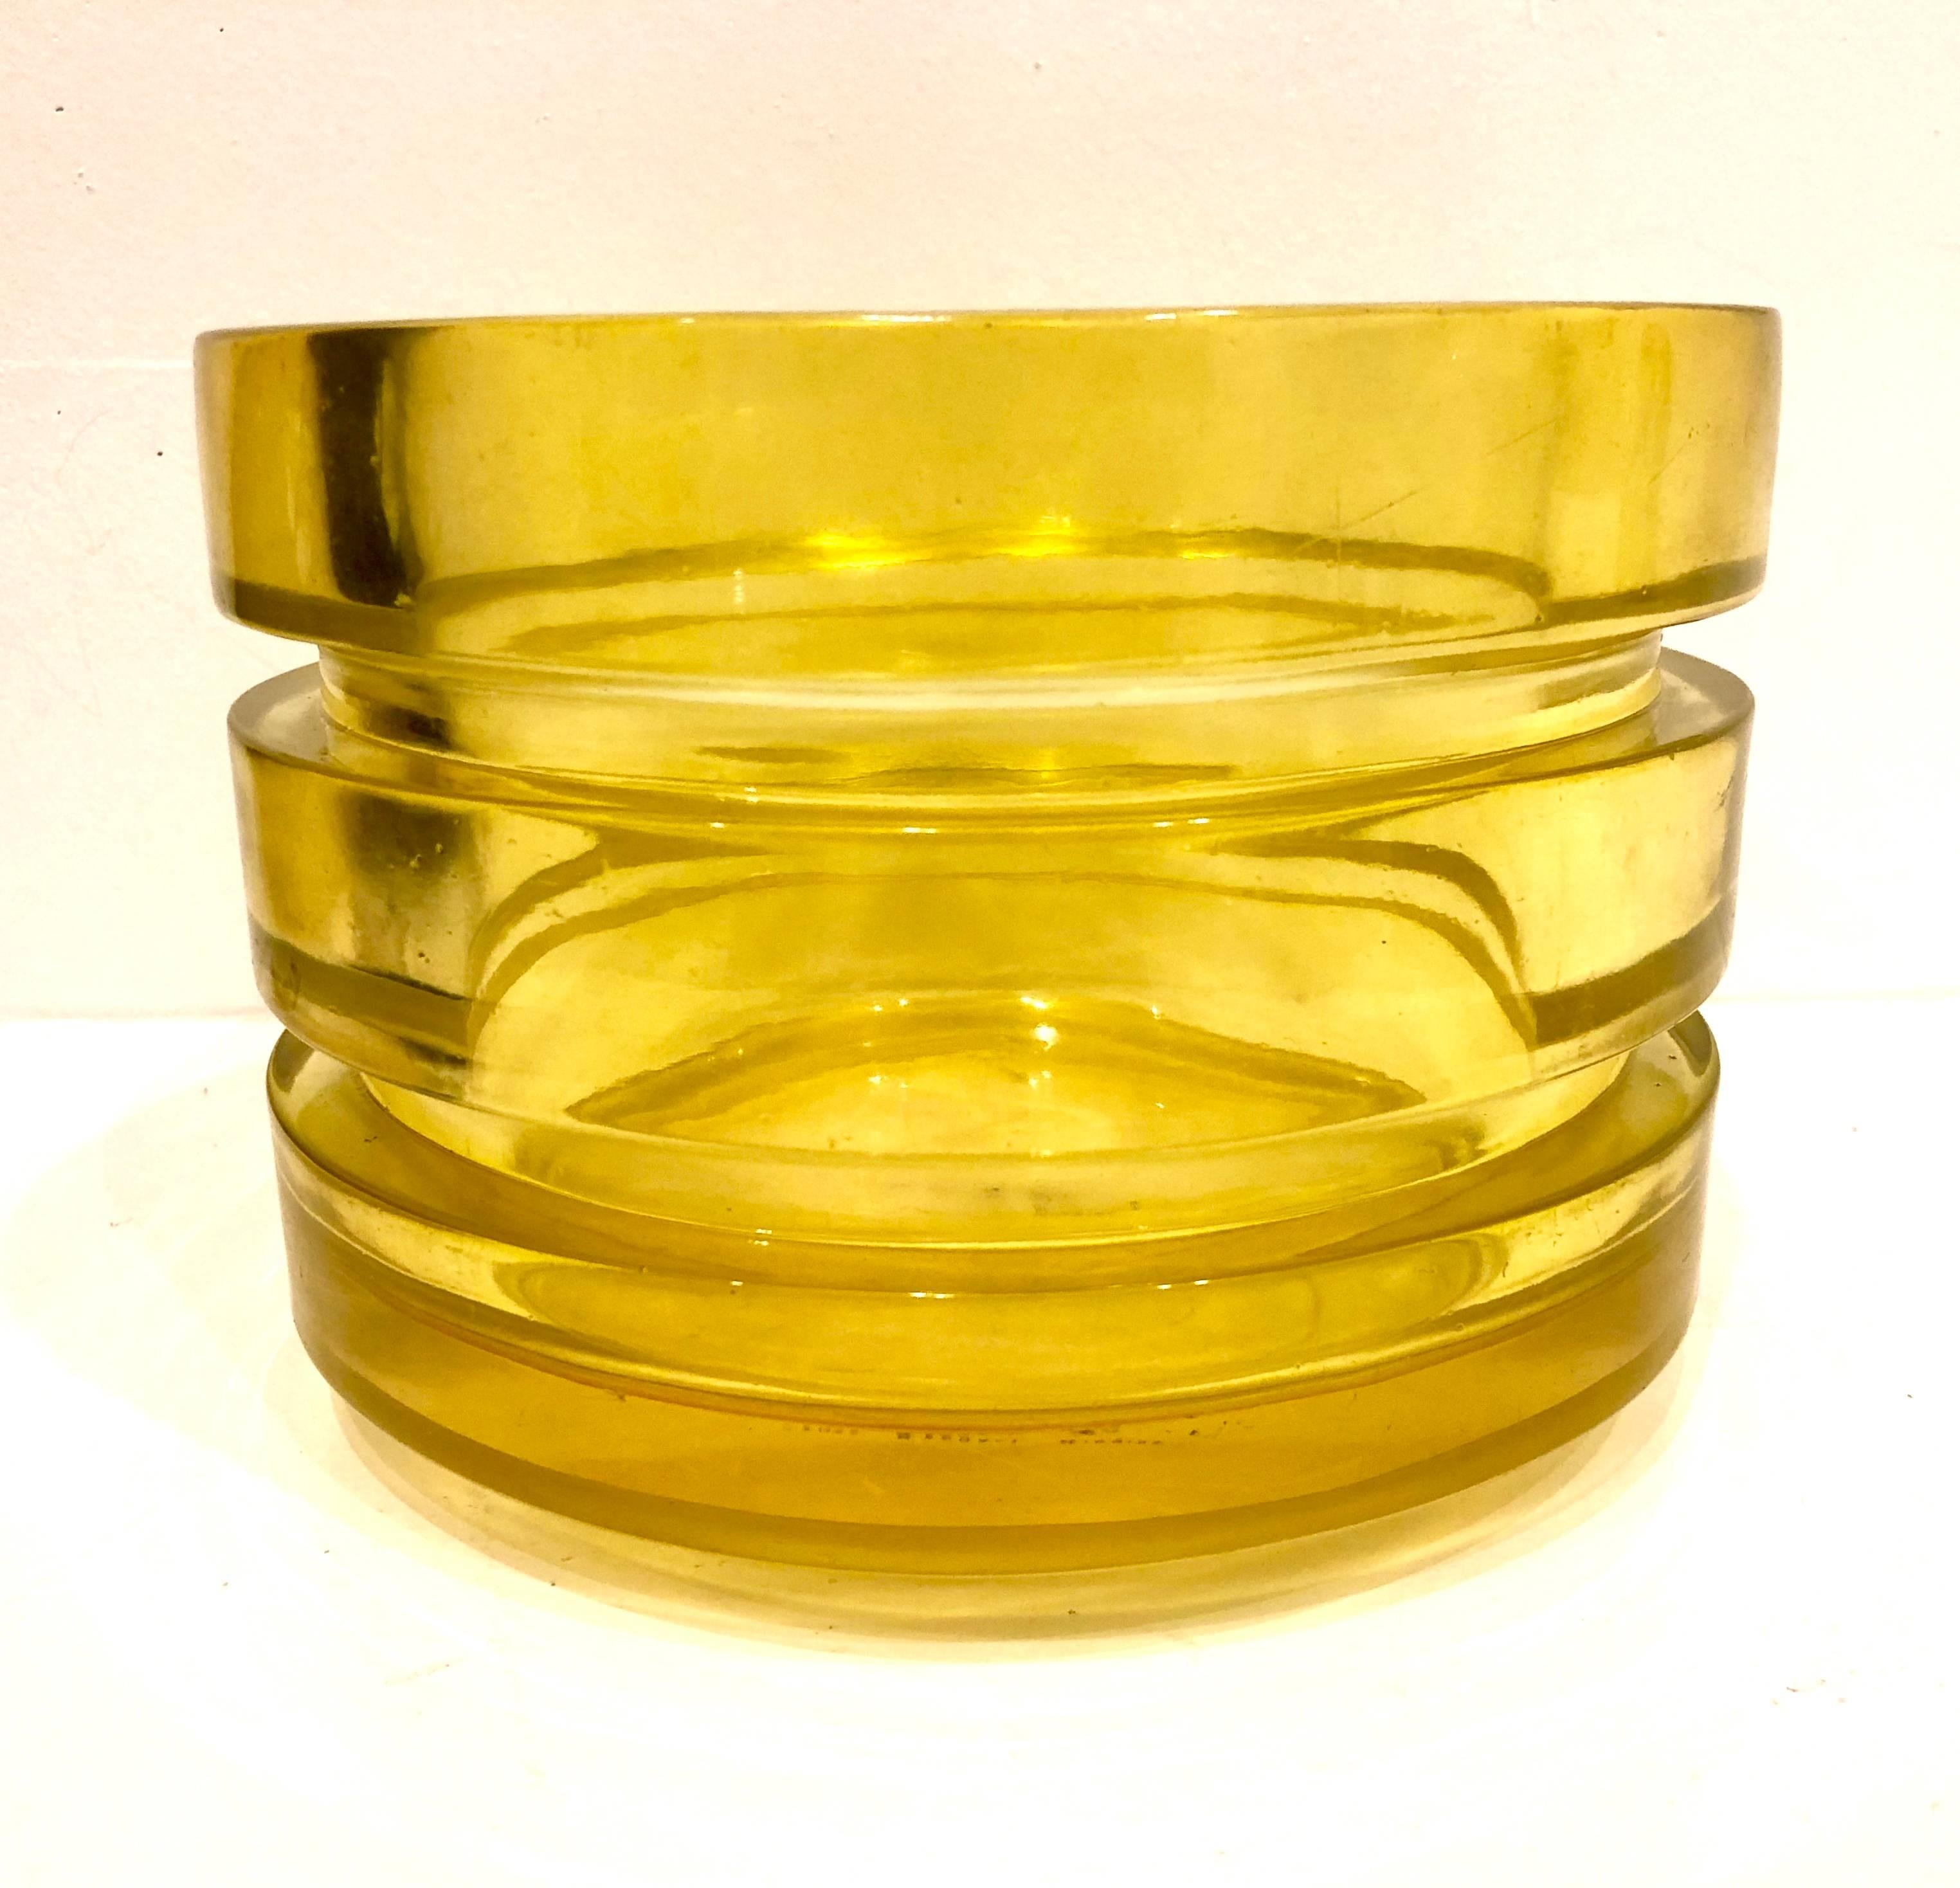 Post-Modern Massive Yellow Resin Vase/ Center Piece by James Kendall Higgins